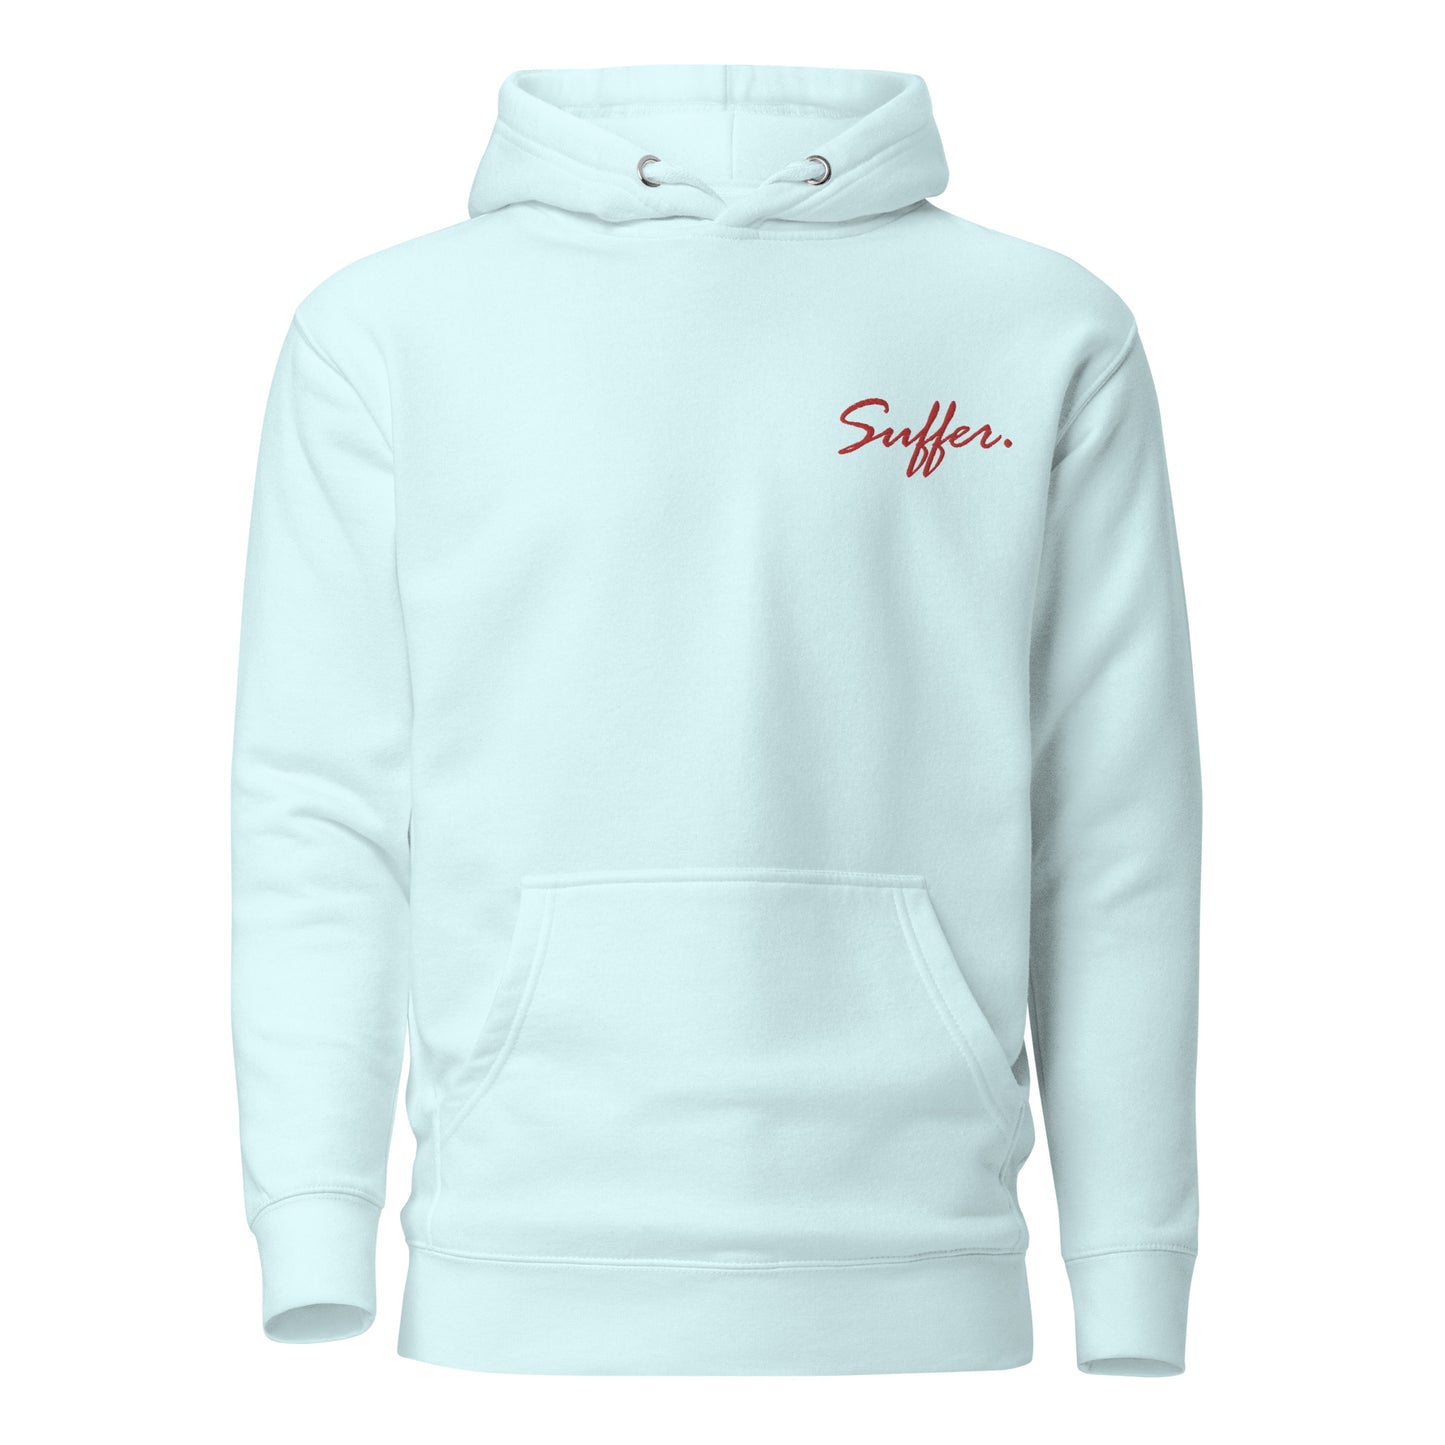 Suffer Signature RED Embroidered Hoodie